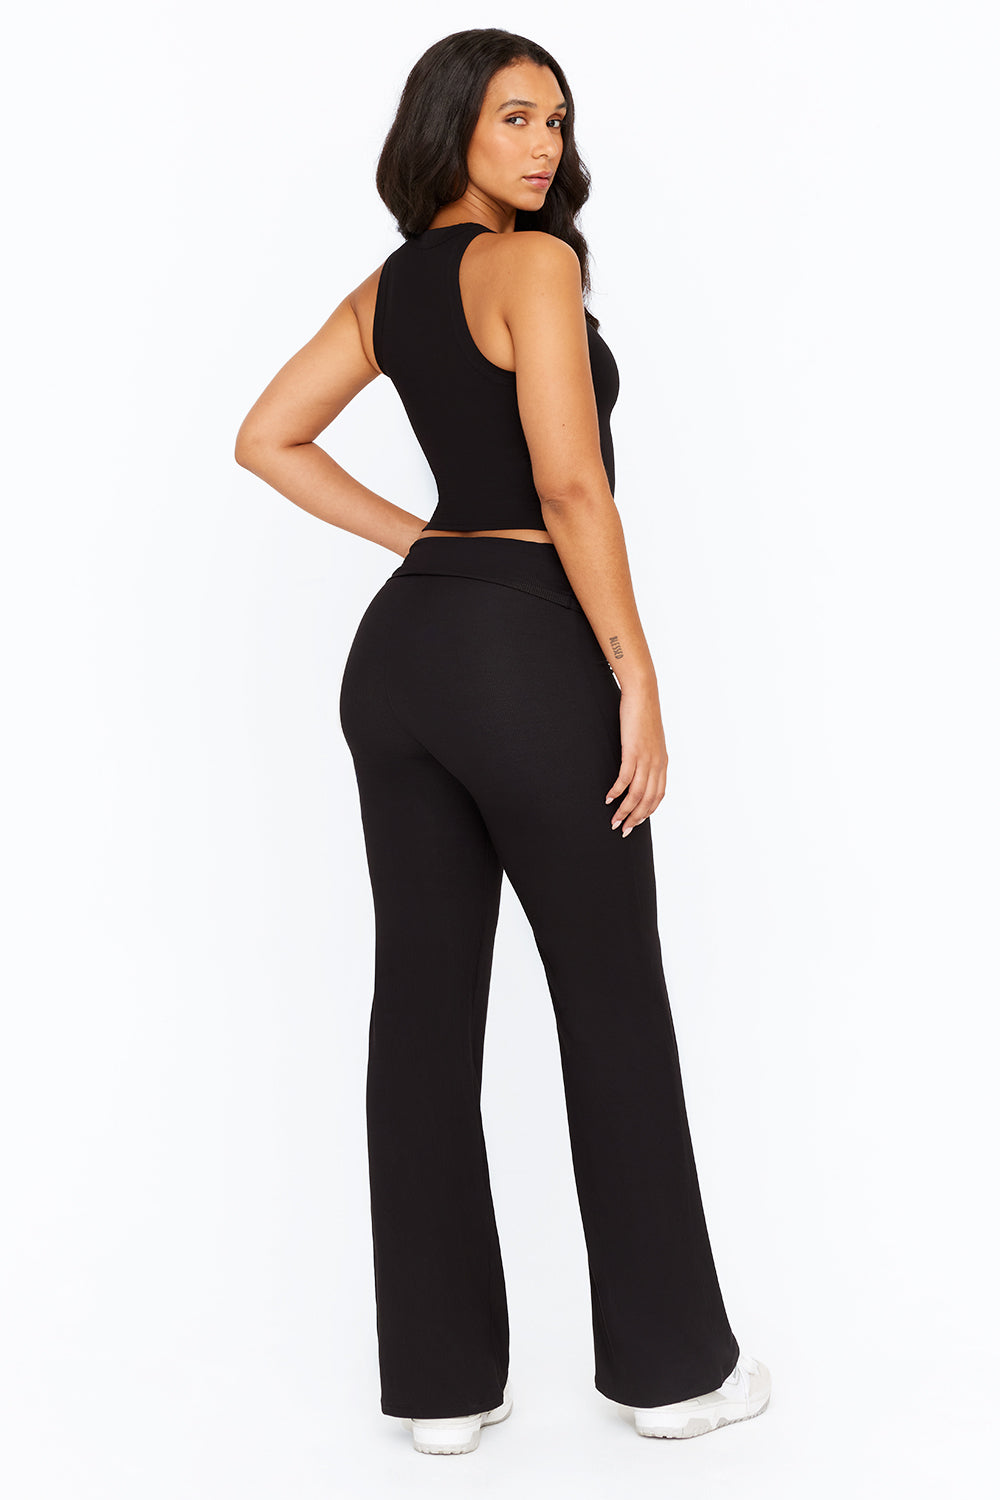 Mediashop Hollywood Pants  3 Body Shaper Trousers in Size L